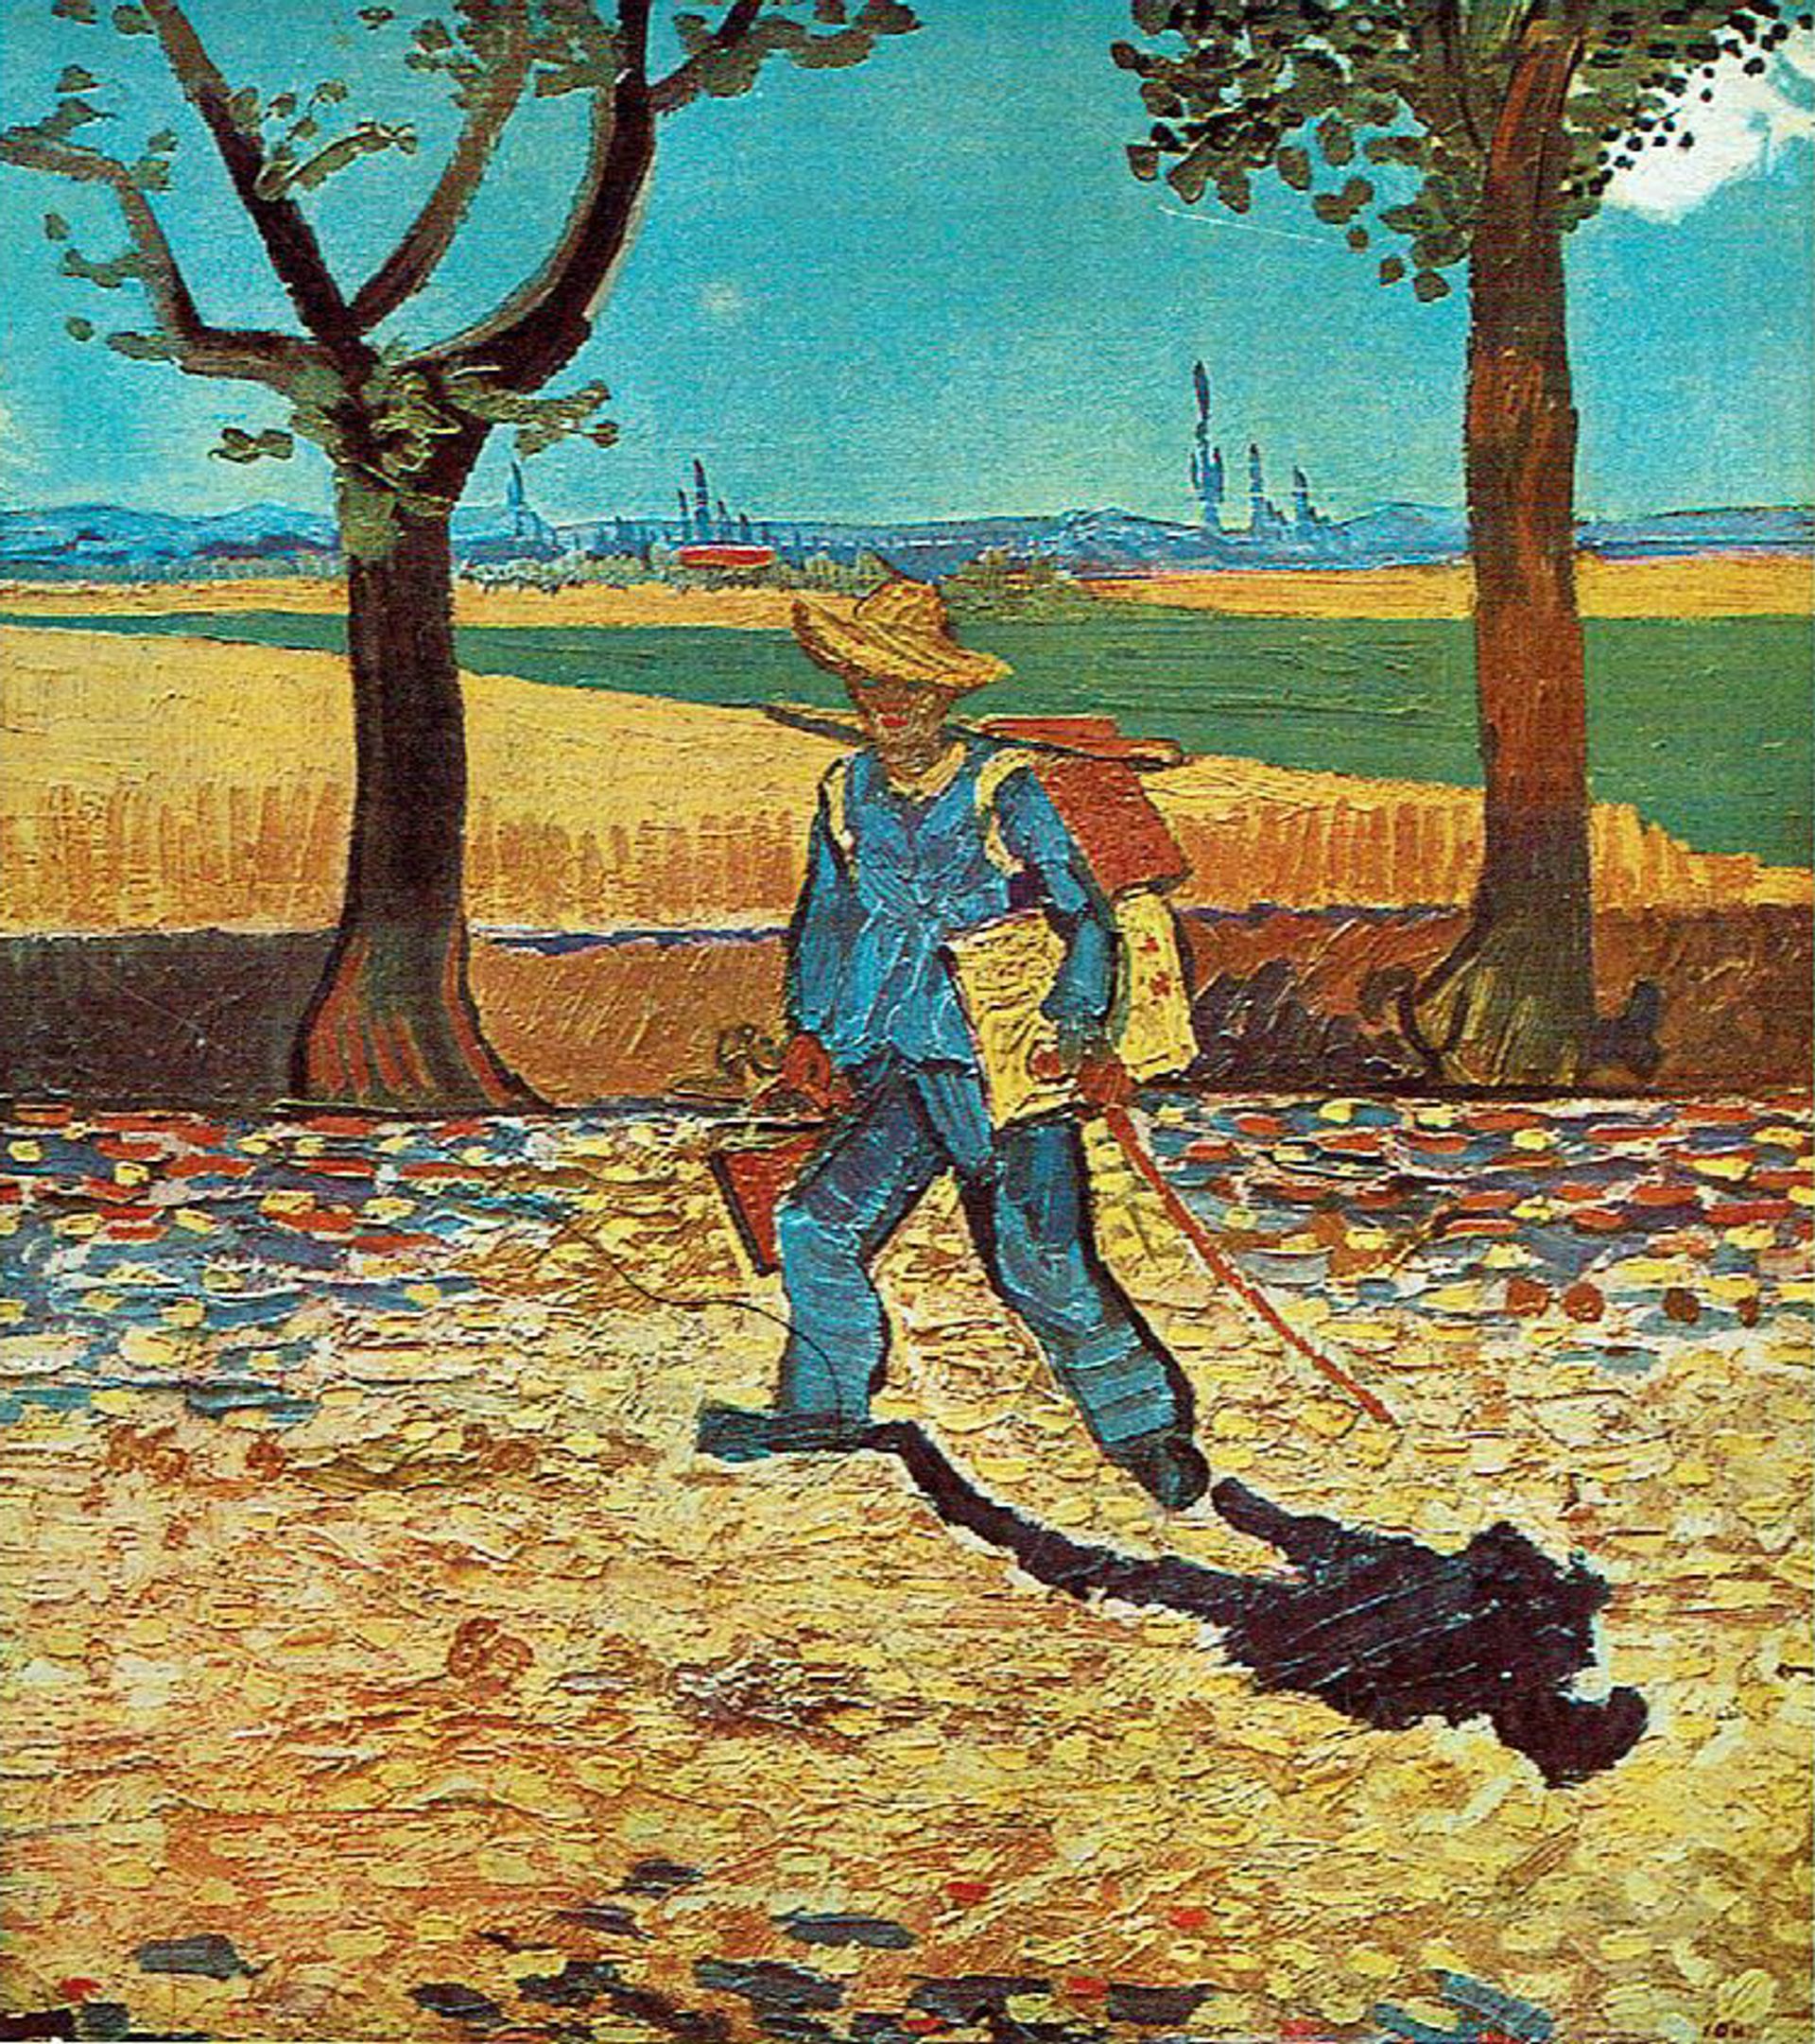 Vincent van Gogh’s The Artist on the Road to Tarascon (August 1888) Courtesy of the Kulturhistorisches Museum Magdeburg (inventory GK 558, St 29)